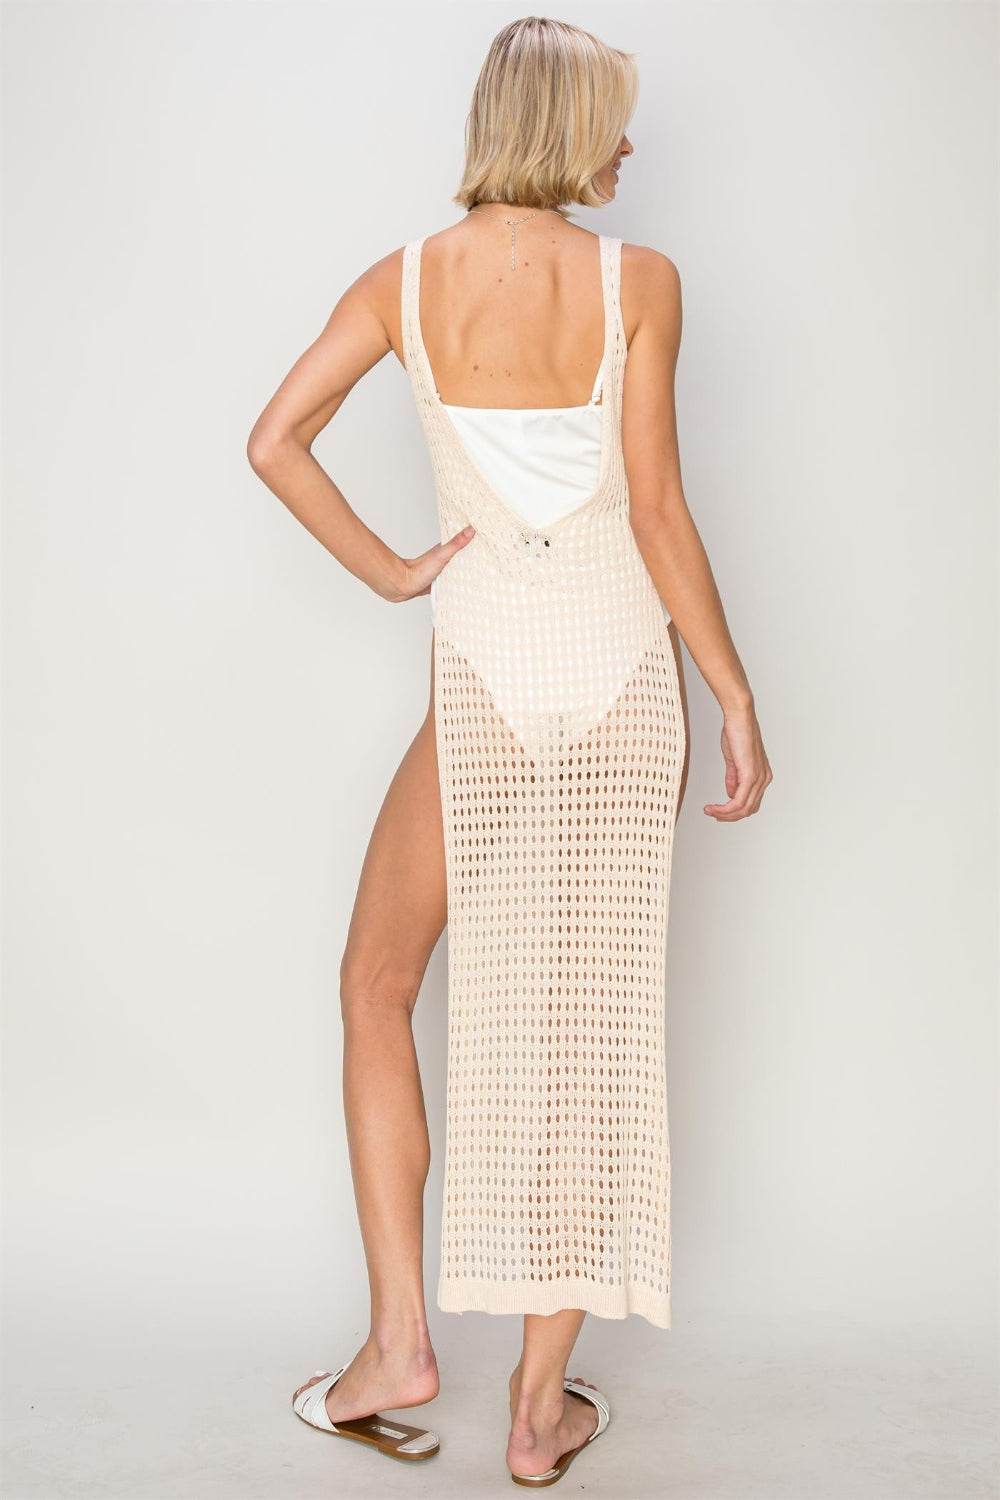 This crochet backless cover-up dress is a stunning and stylish addition to your summer wardrobe. The delicate crochet details add a feminine touch, while the backless design adds a touch of sensuality.  S  - L